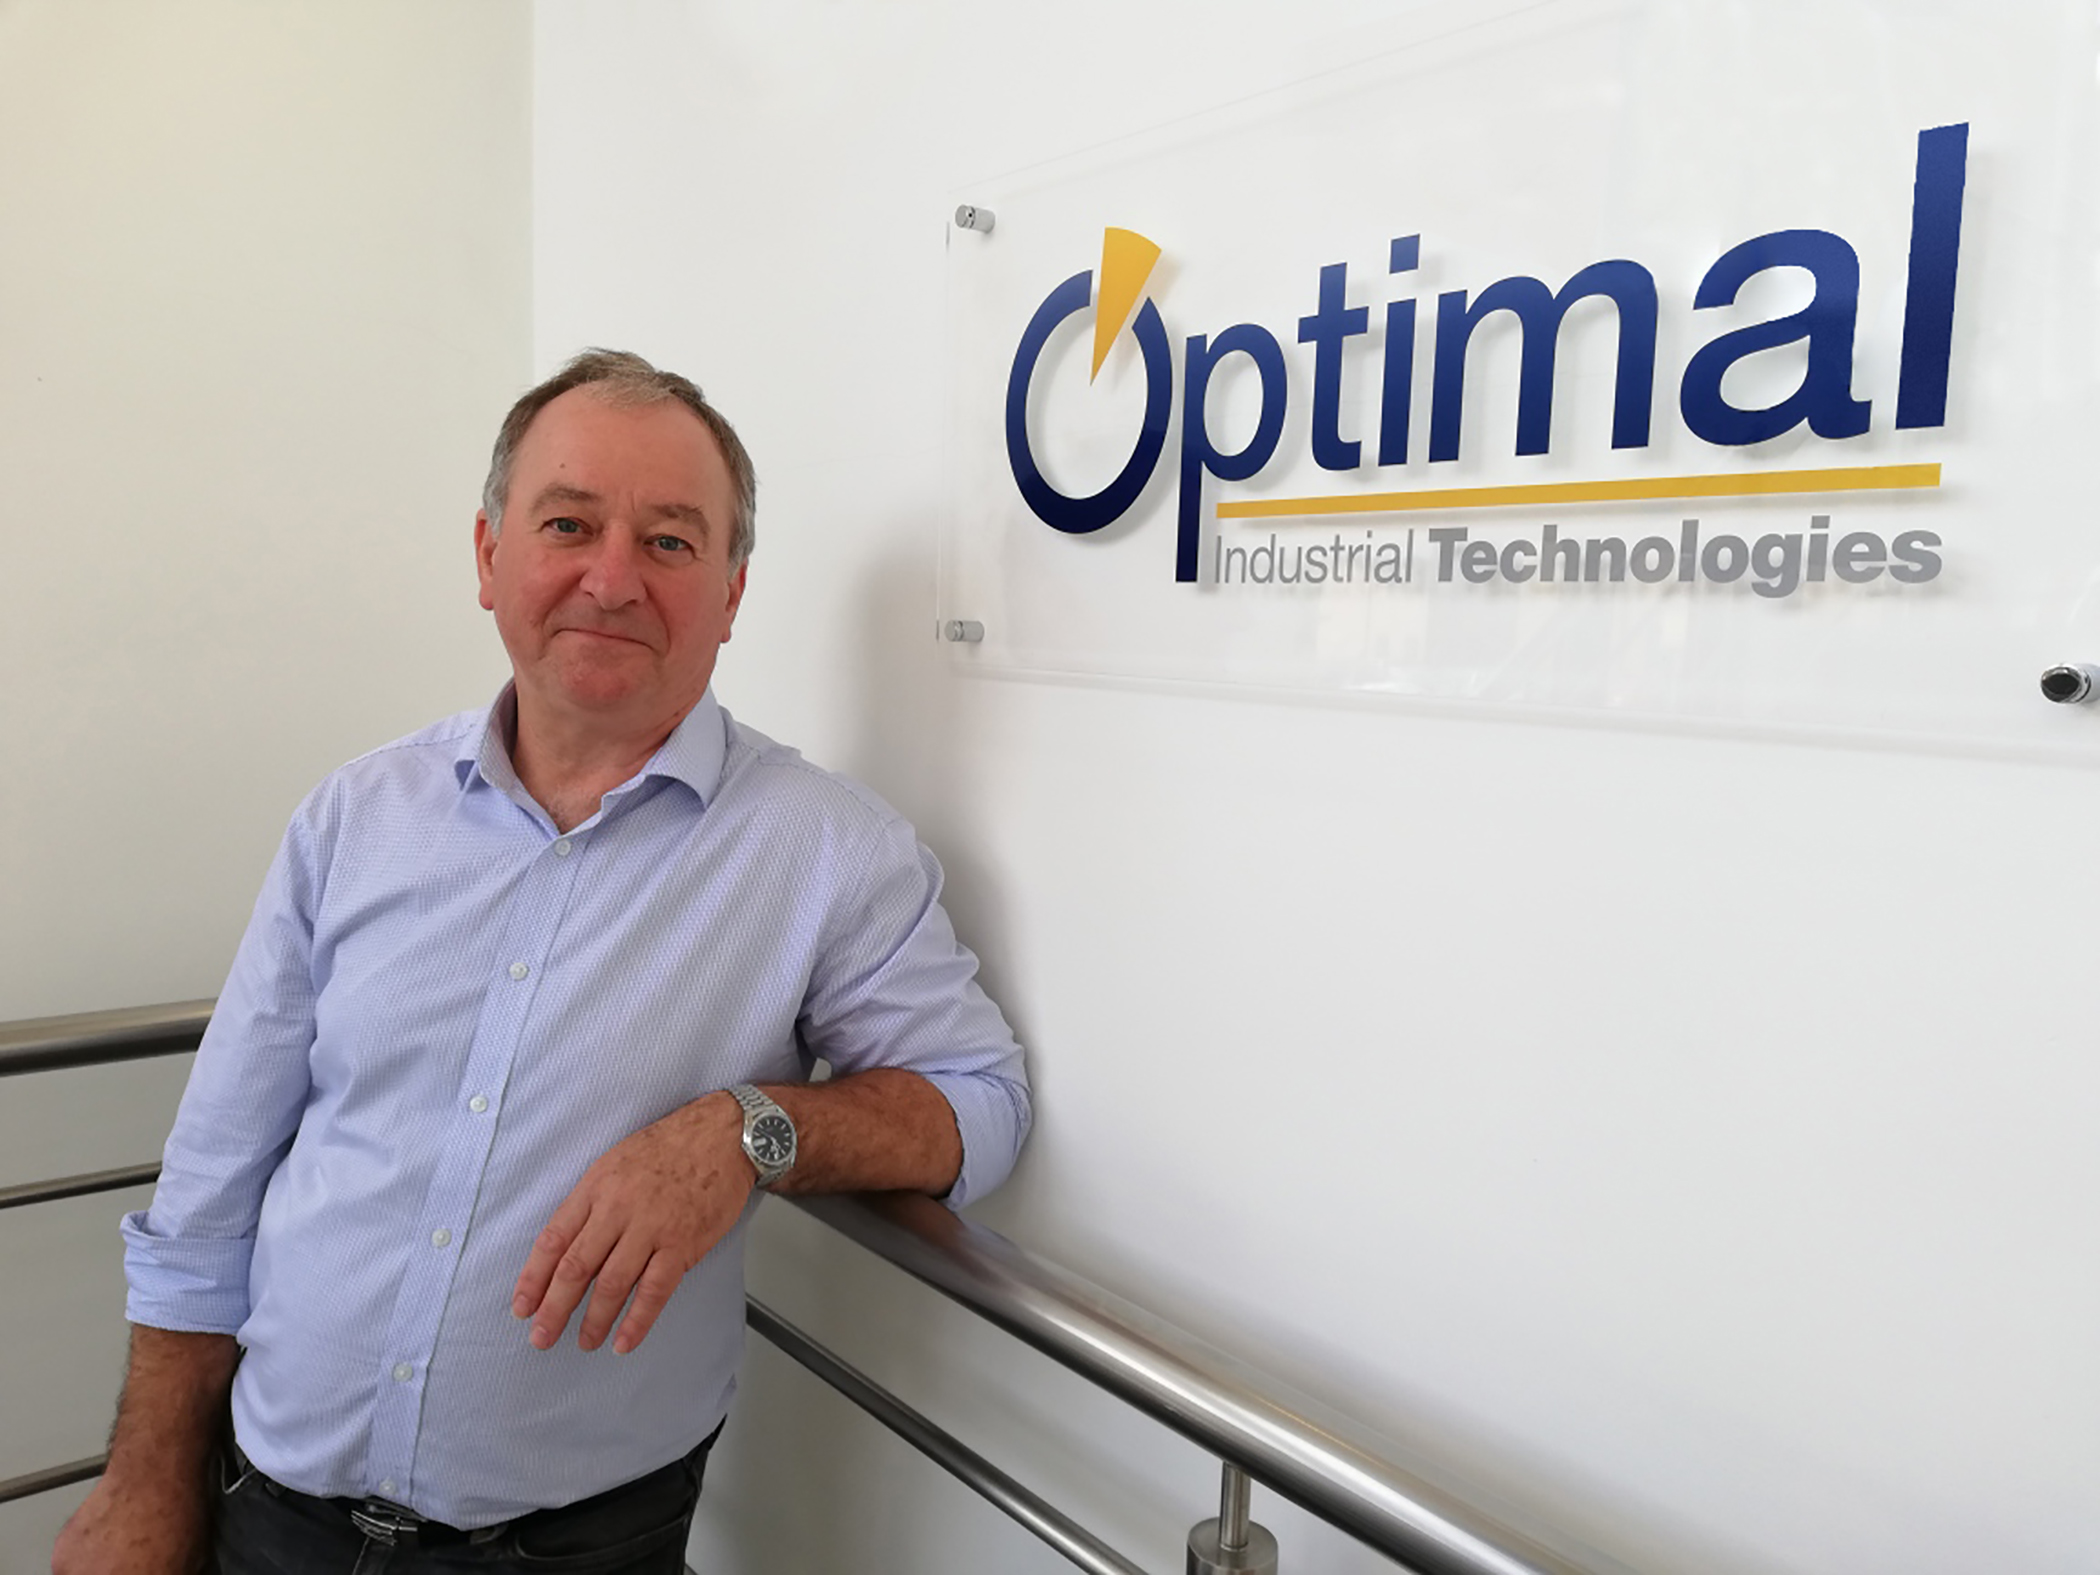 Martin Gadsby, Director at Optimal Industrial Technologies, will deliver two presentations during the event that highlight how a holistic PAT approach is the key to develop robust, comprehensive manufacturing processes.